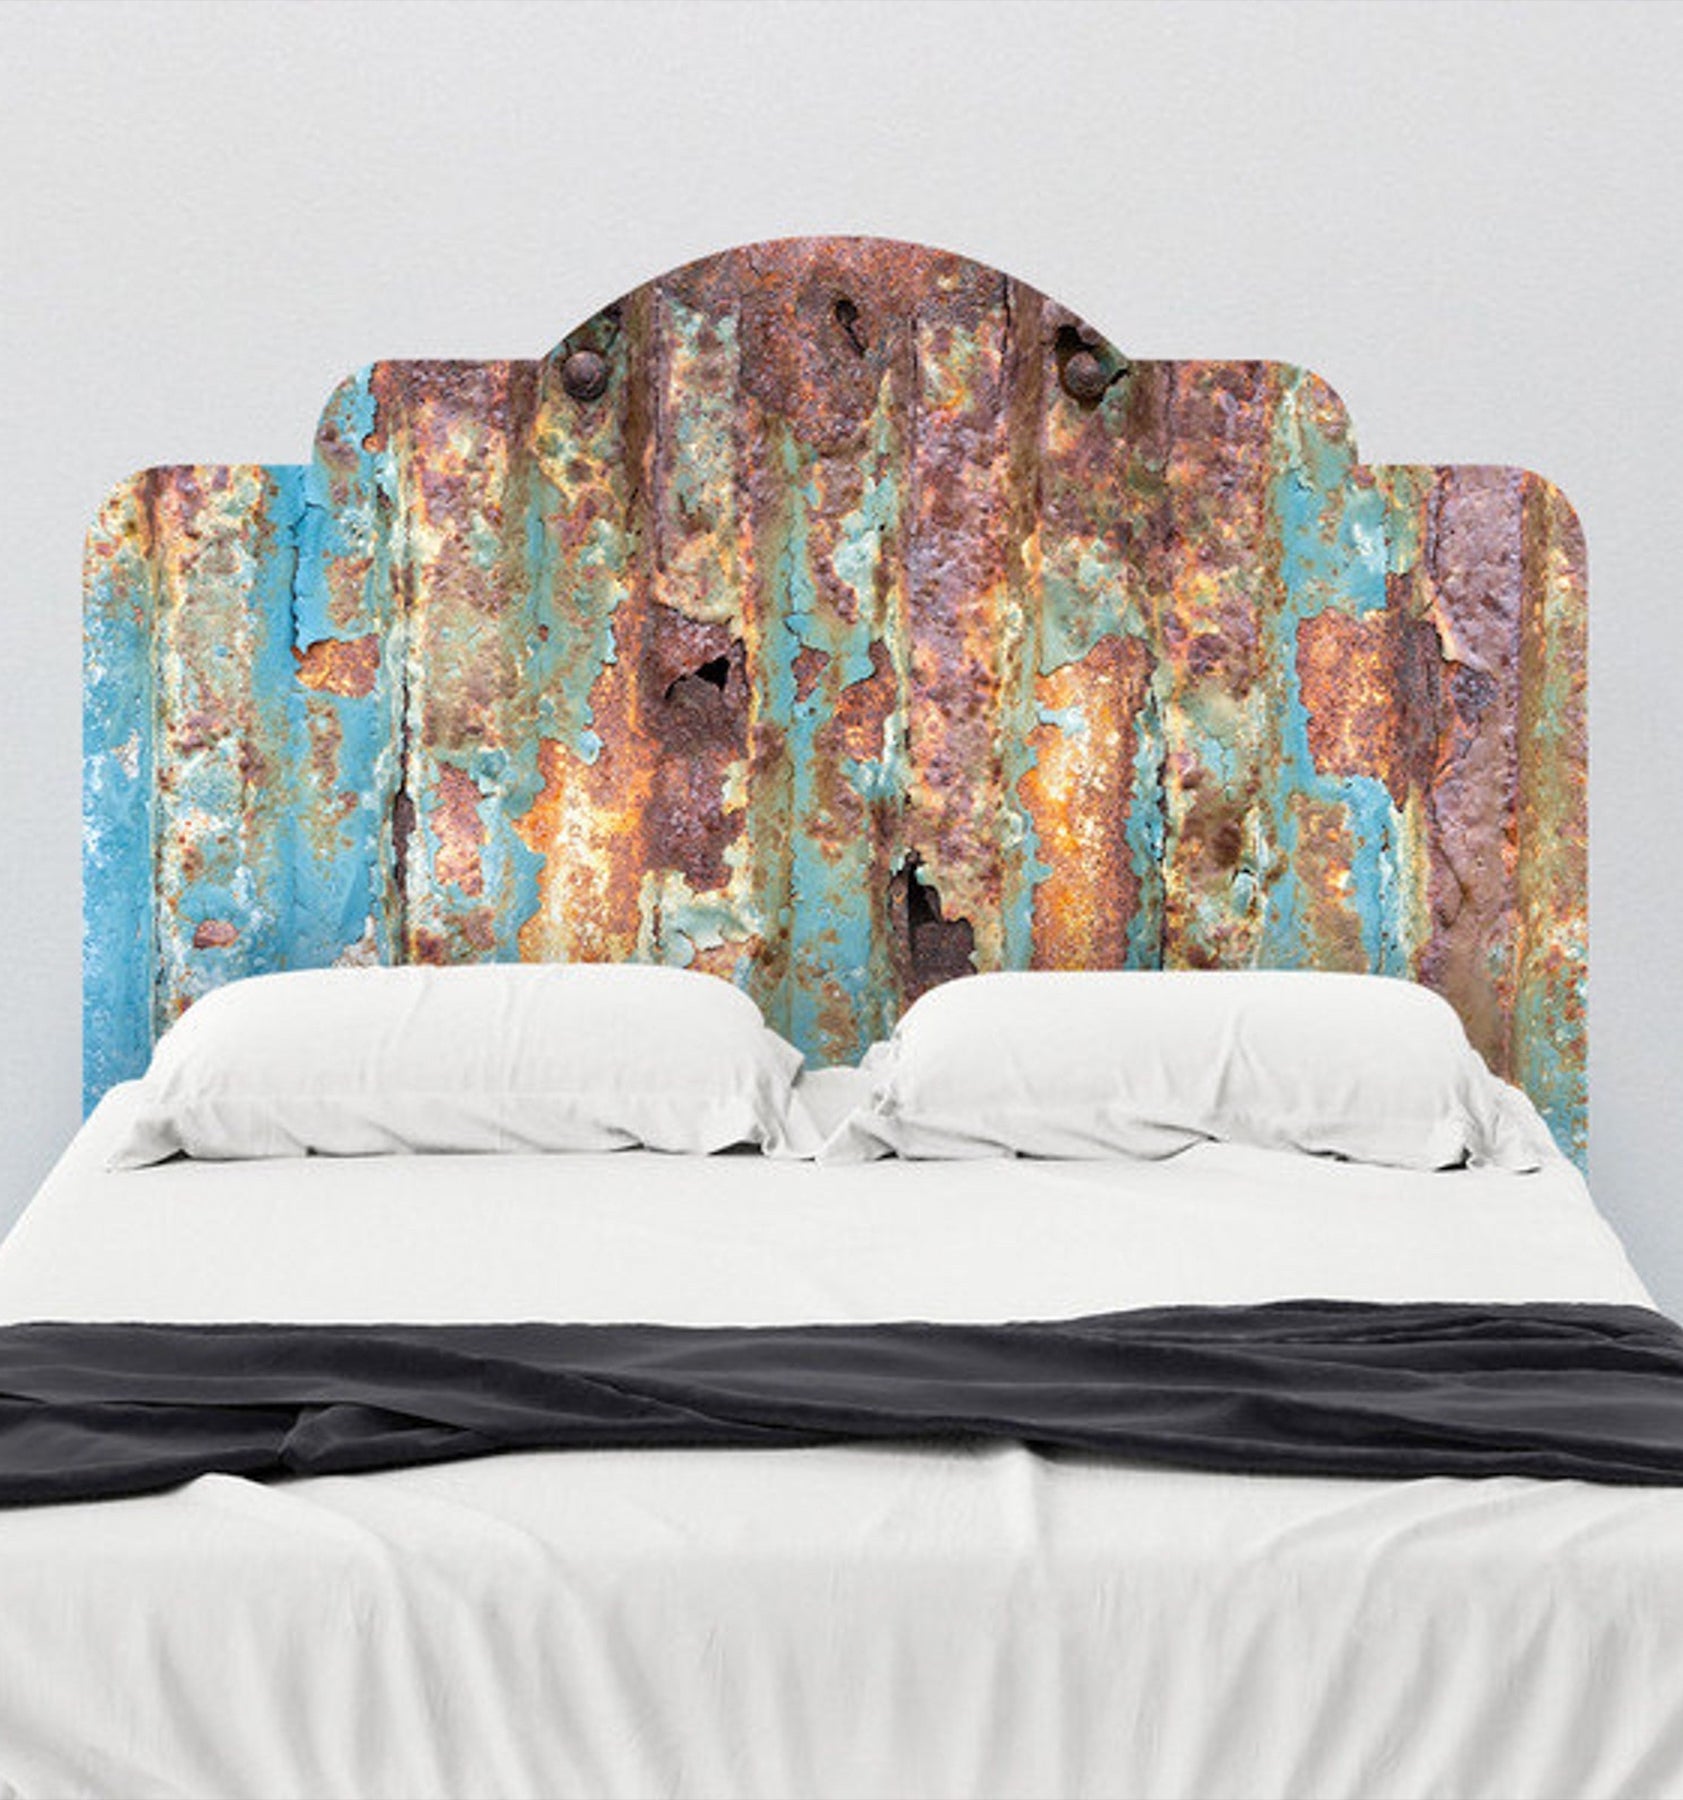 A tiered-edge decal that looks like orange, blue, and brown rusted metal serves as a headboard for a bed with white bedding. A dark gray blanket lines the bottom of the bed.